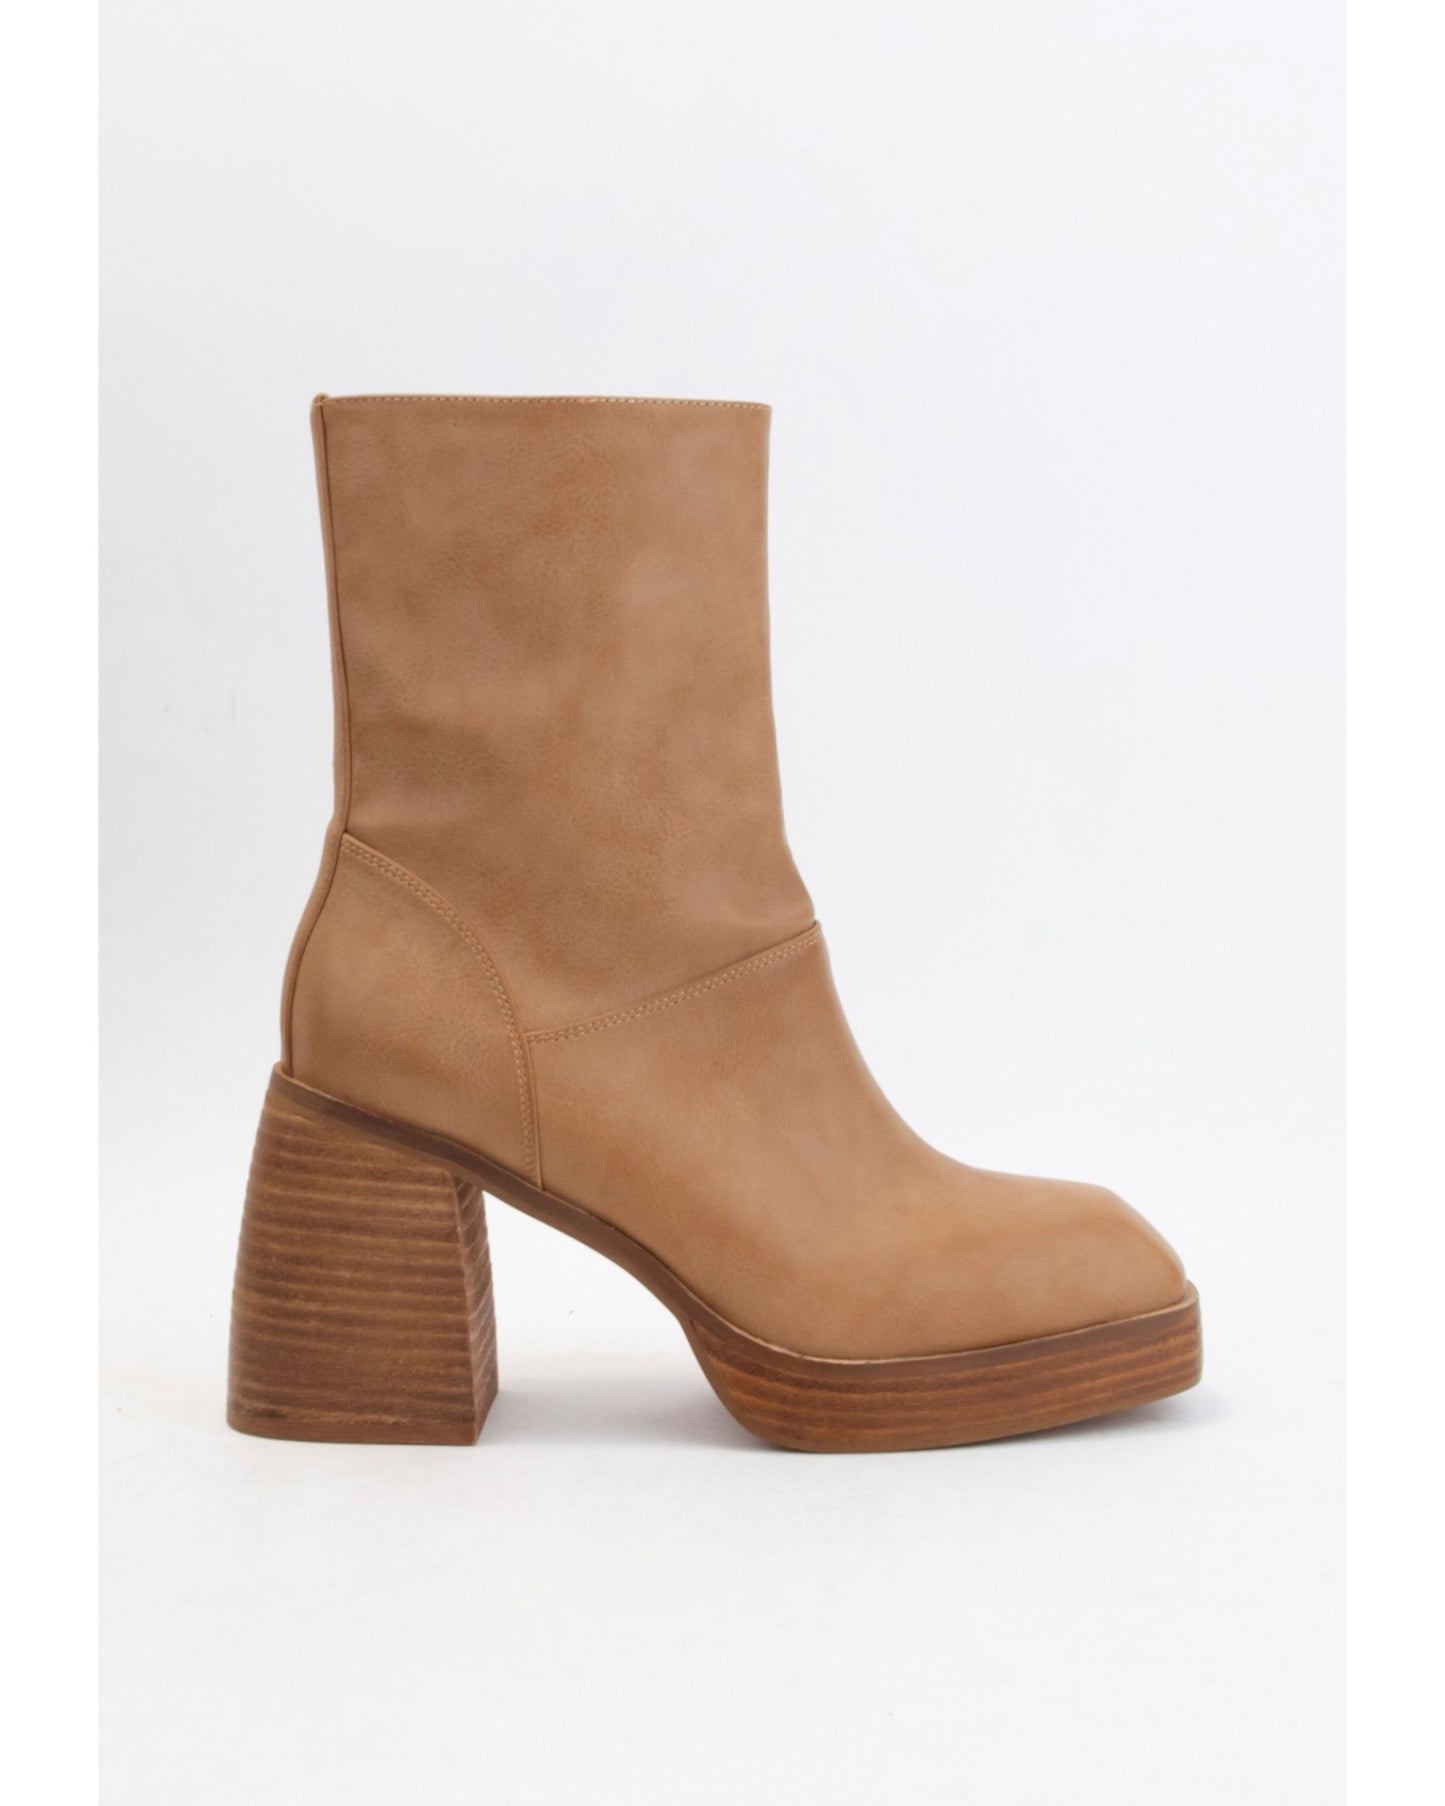 Camel Bootie With Square Toe